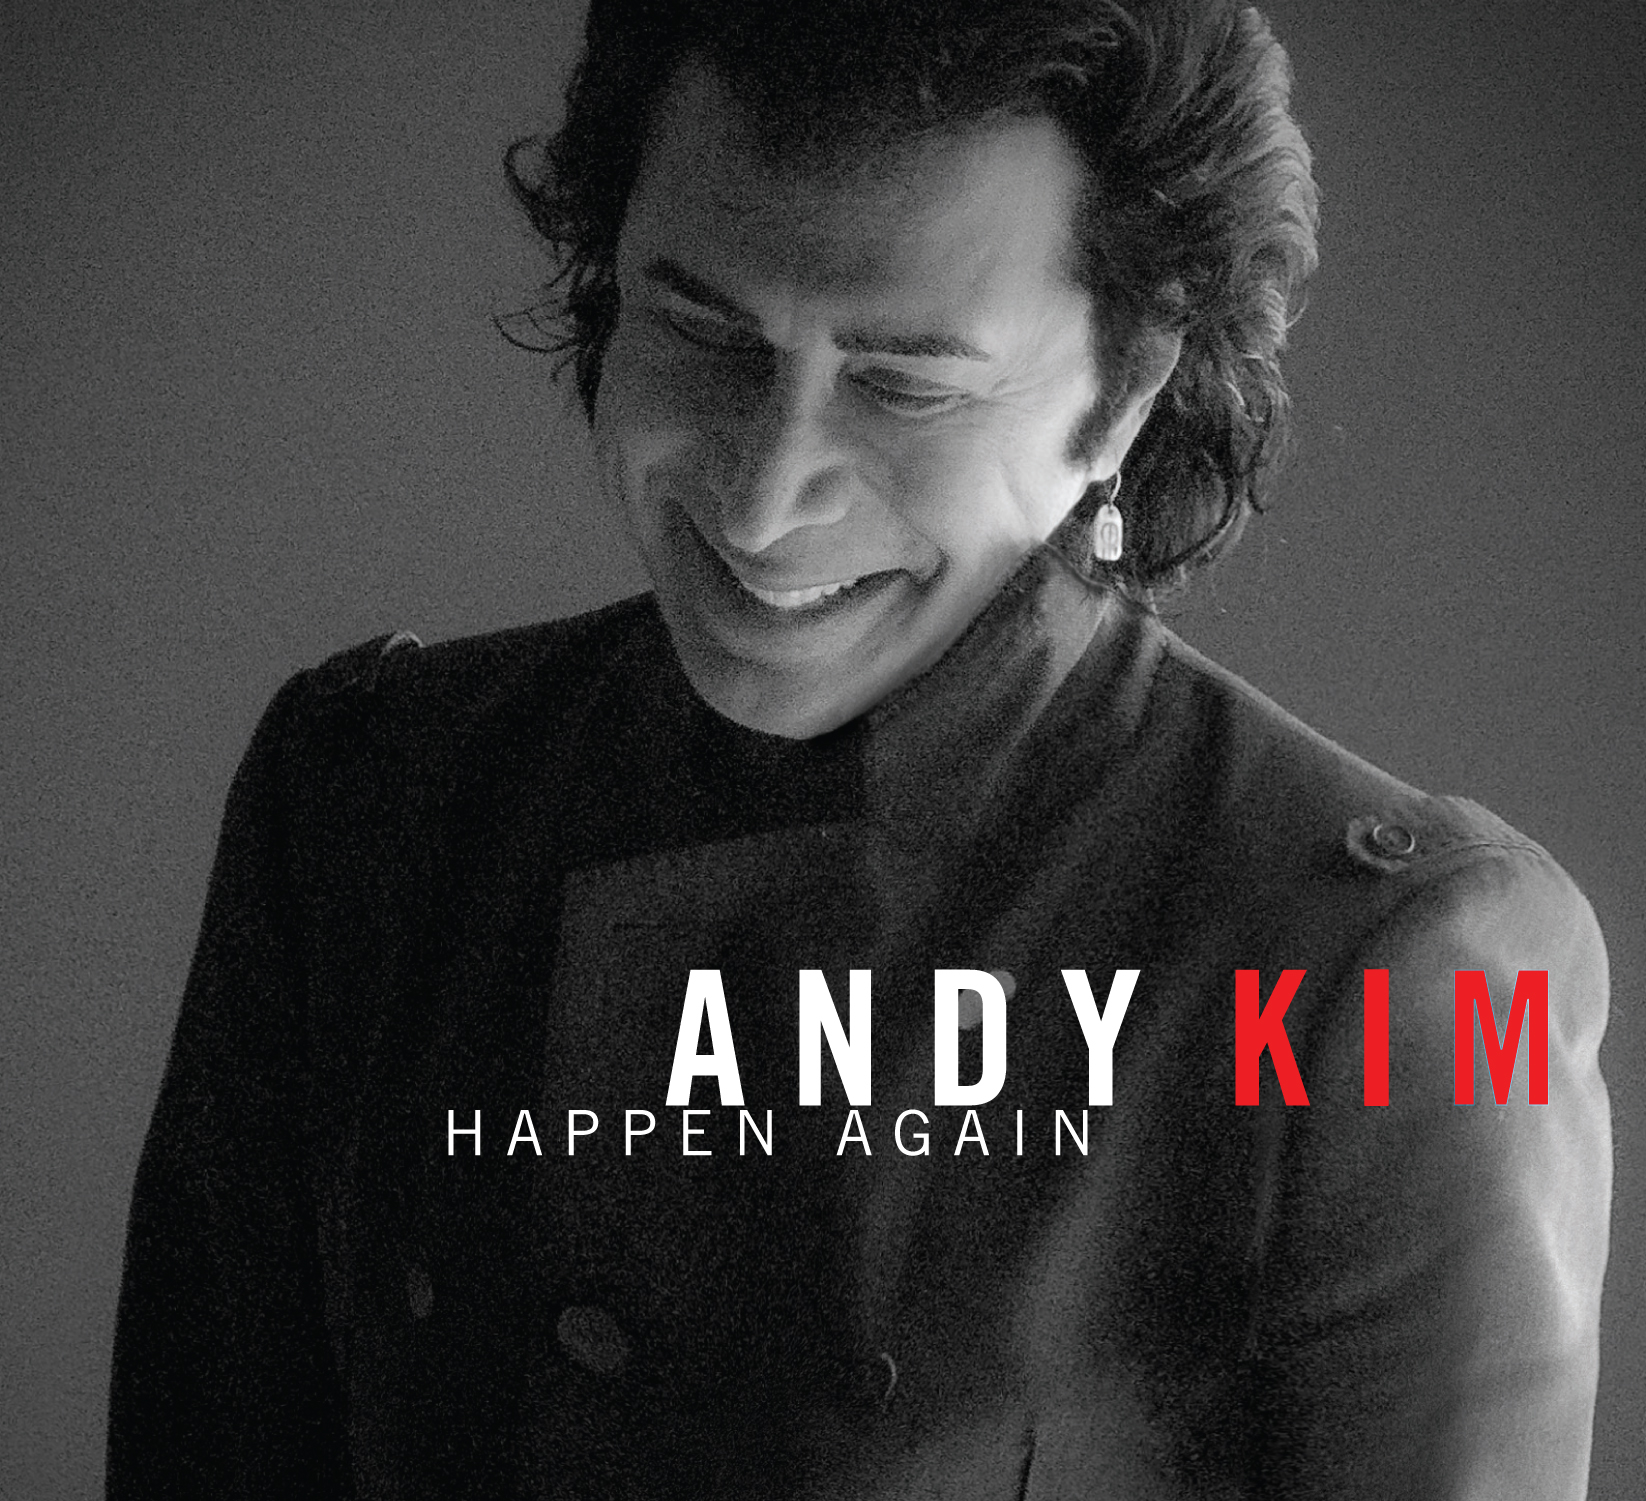 Andy Kim Is Going to ‘Happen Again’!